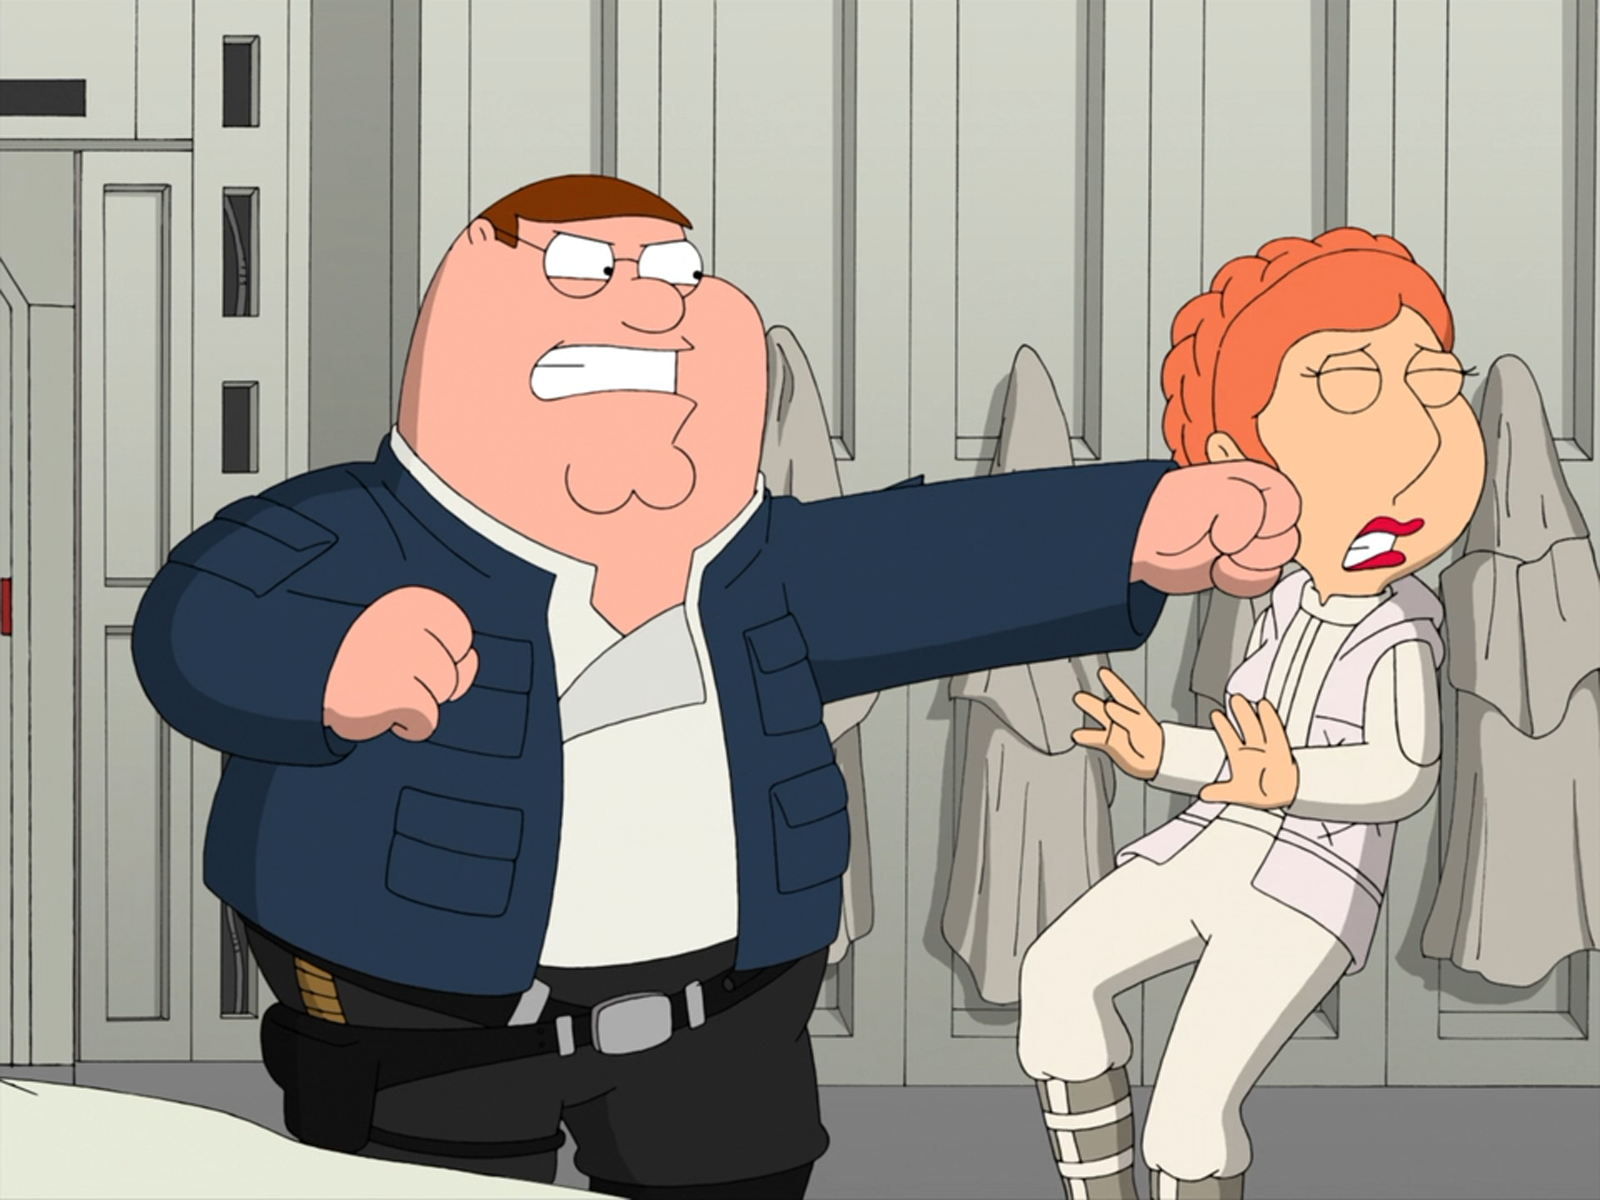 Family Guy Star Wars Peter Griffin - HD Wallpaper 